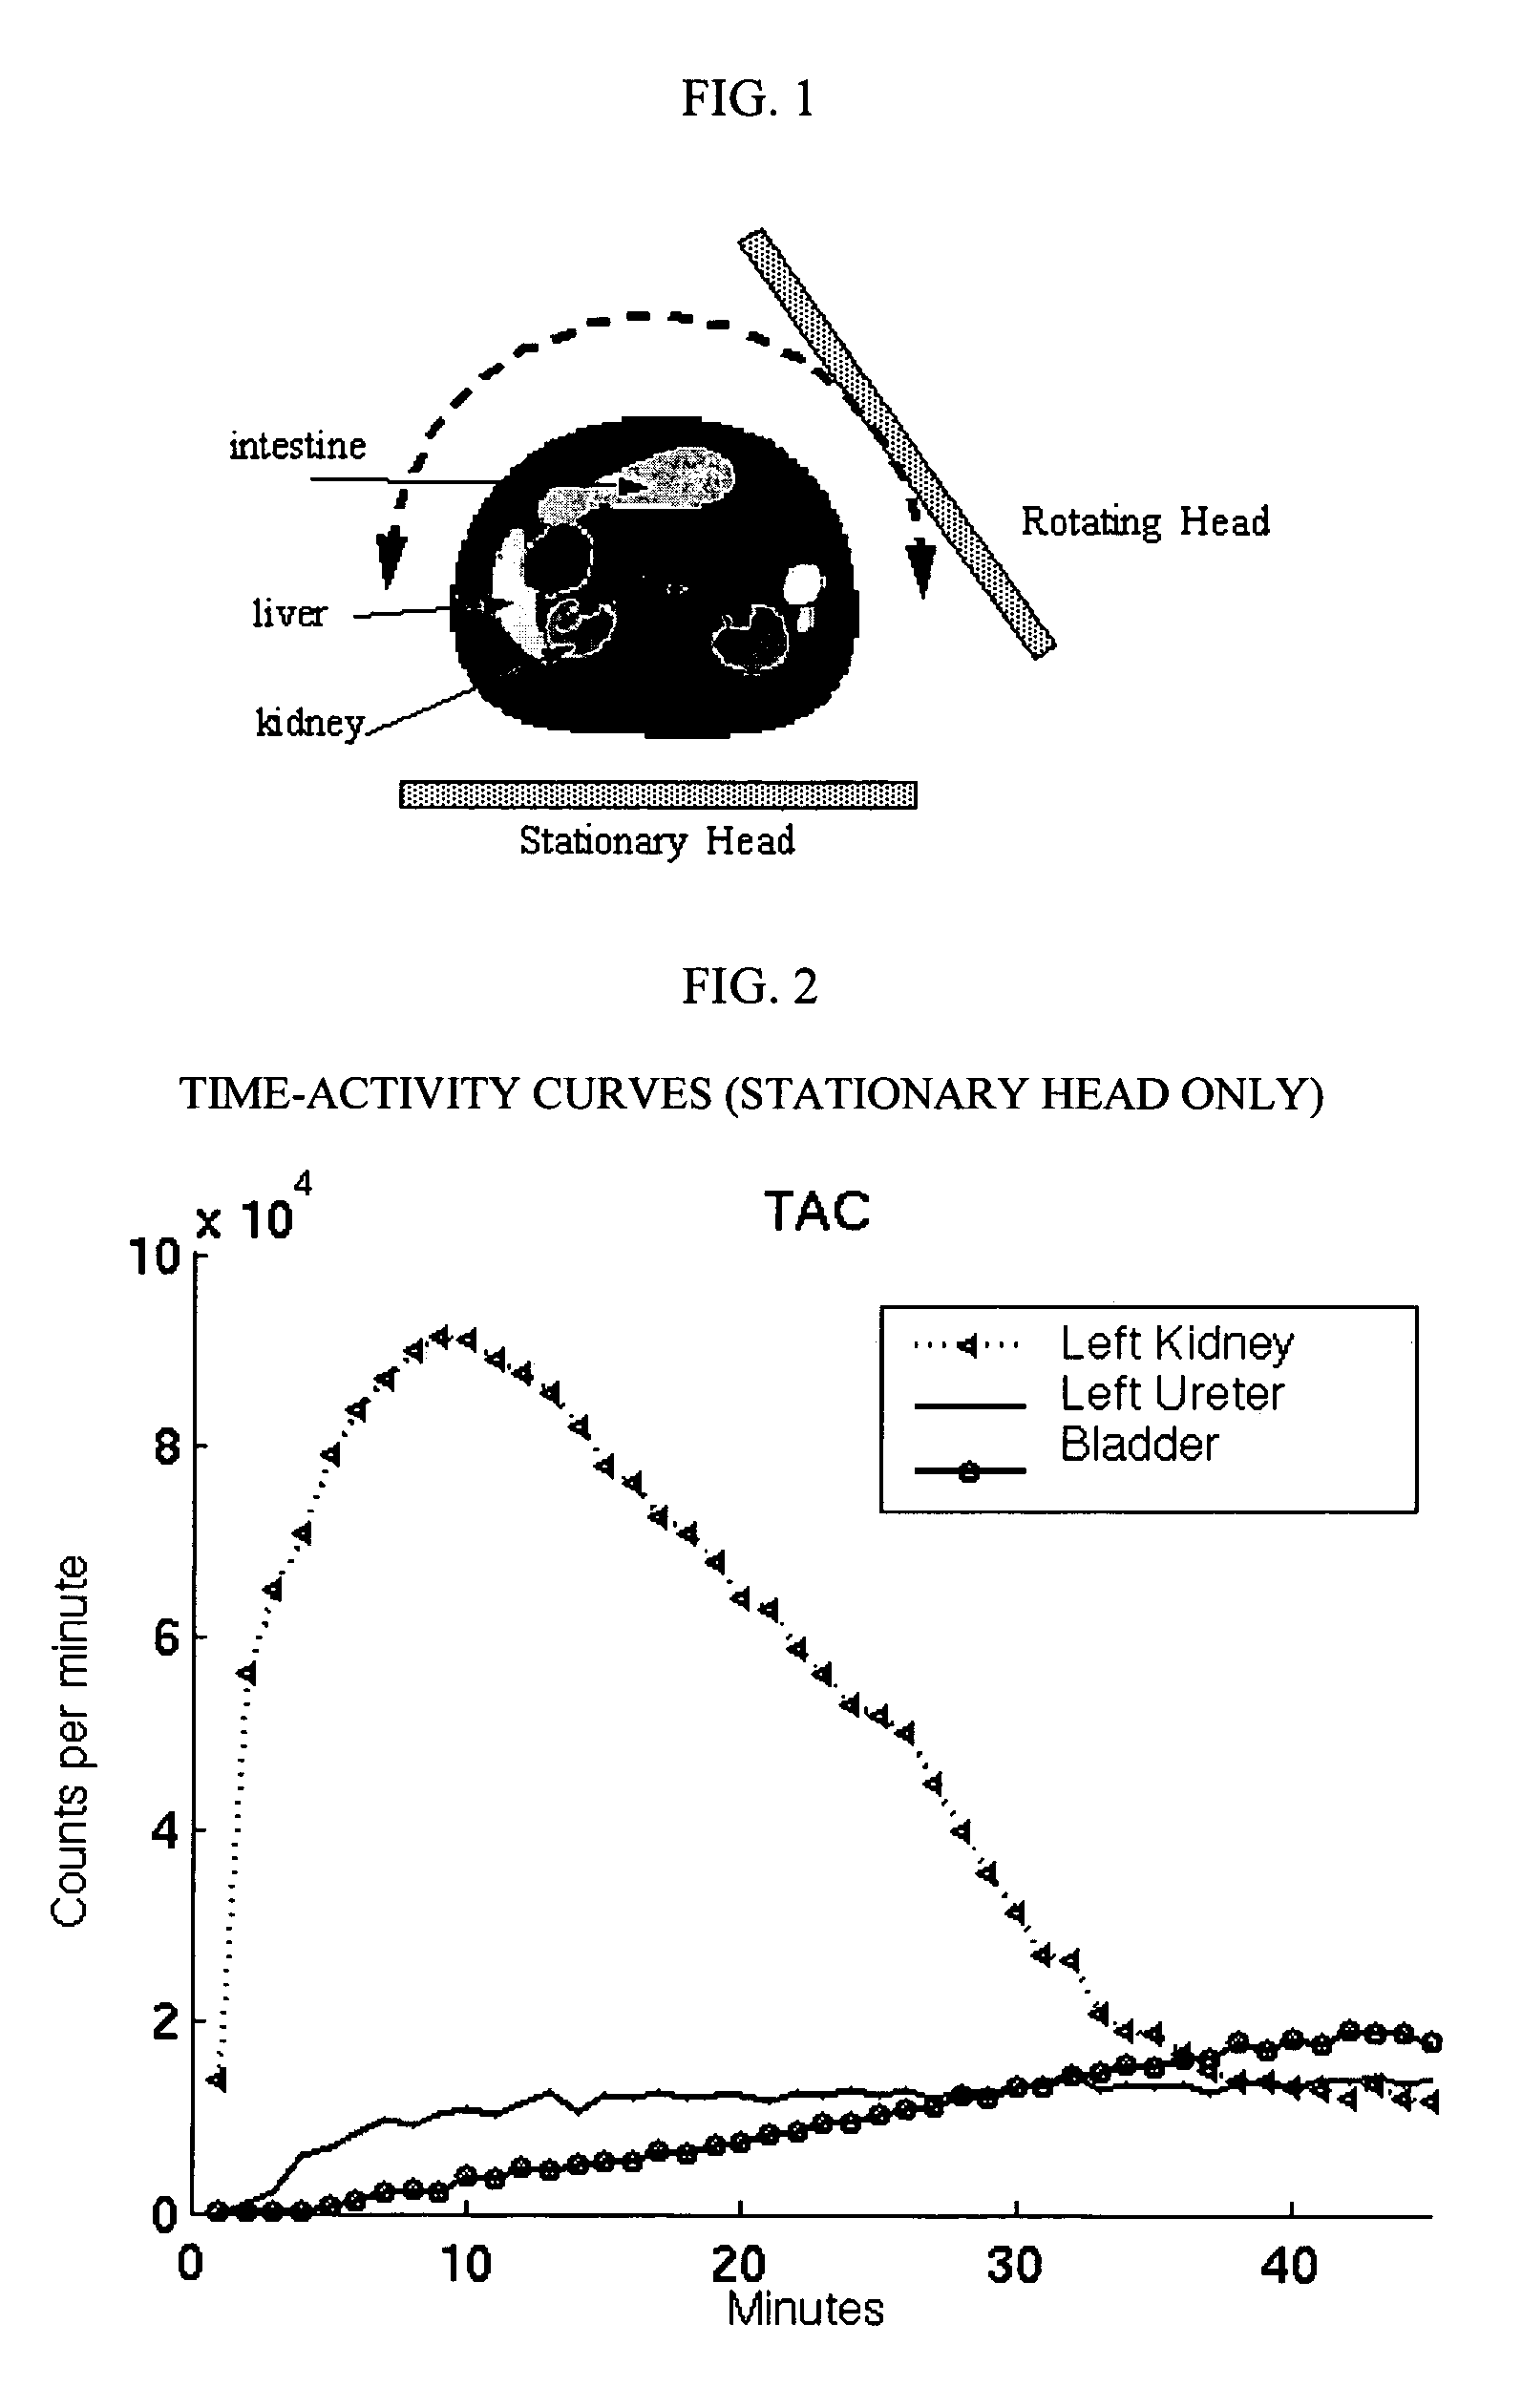 Fast dynamic imaging protocol using a multi-head single photon emission computed tomography system